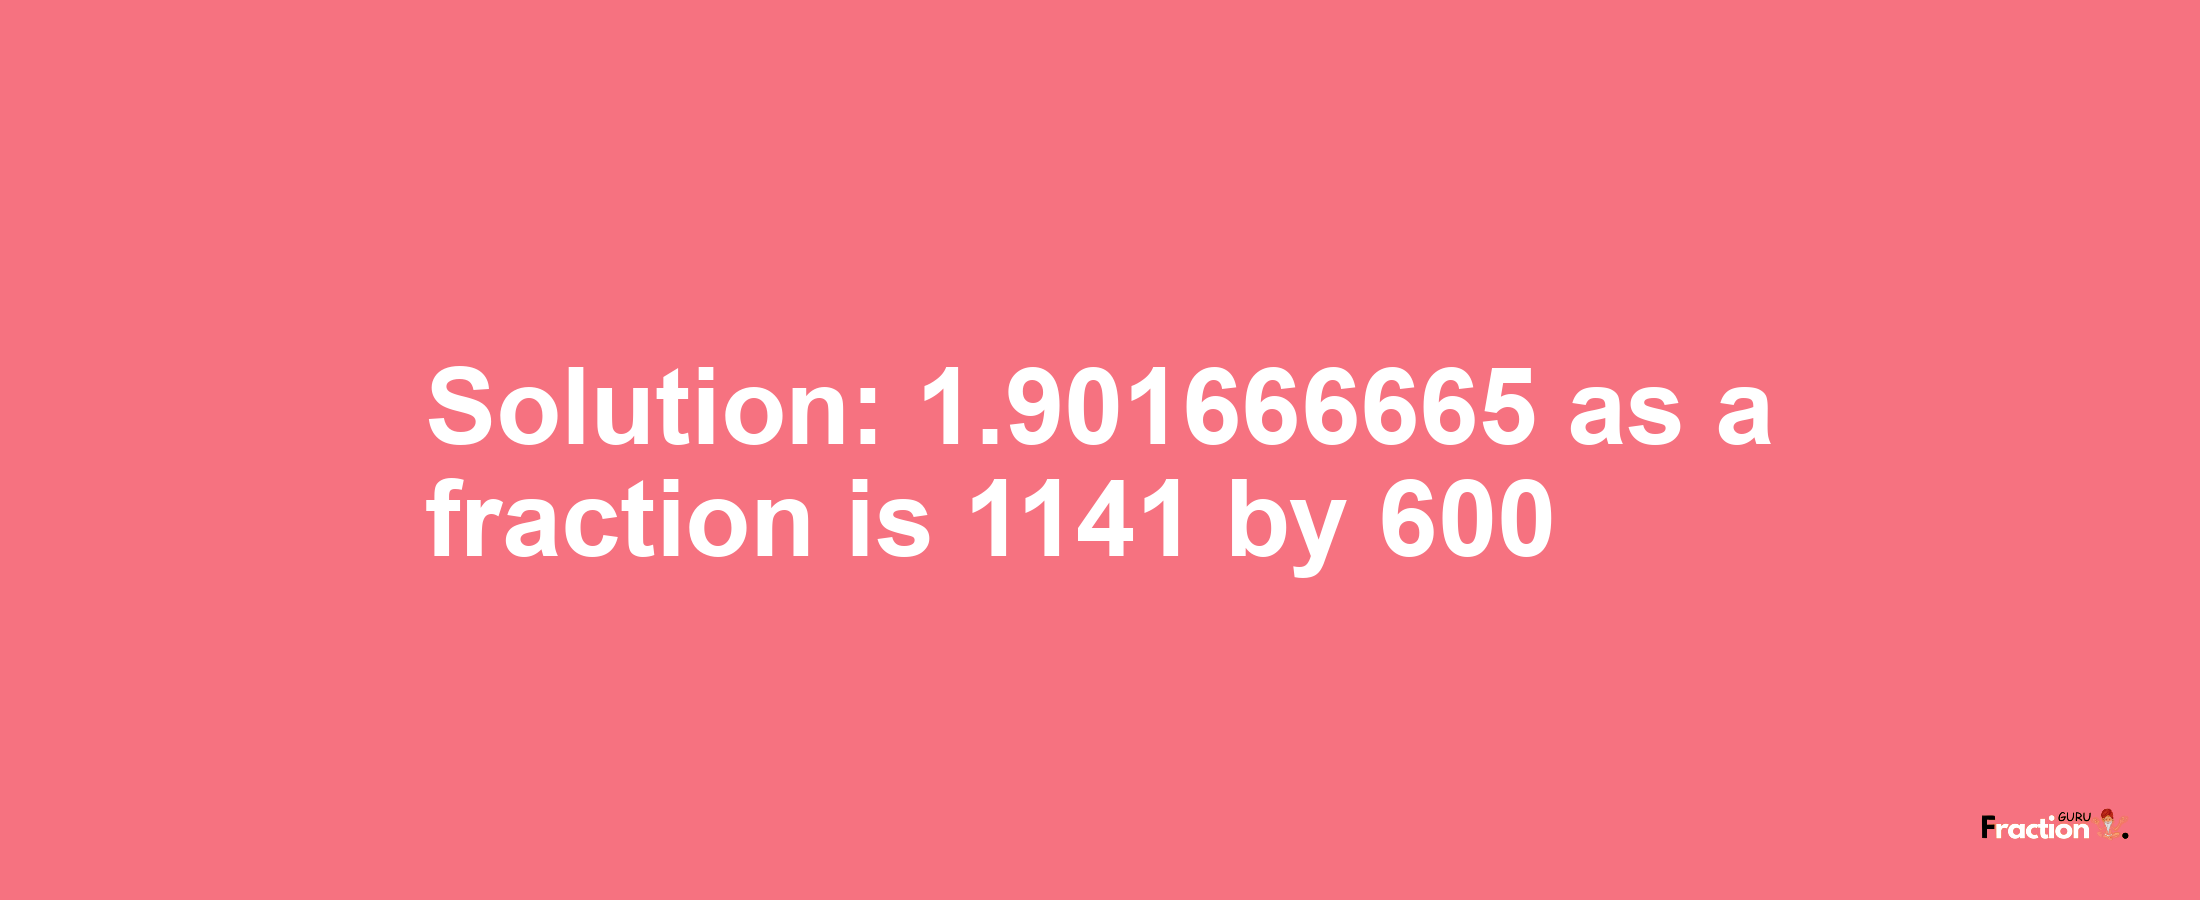 Solution:1.901666665 as a fraction is 1141/600